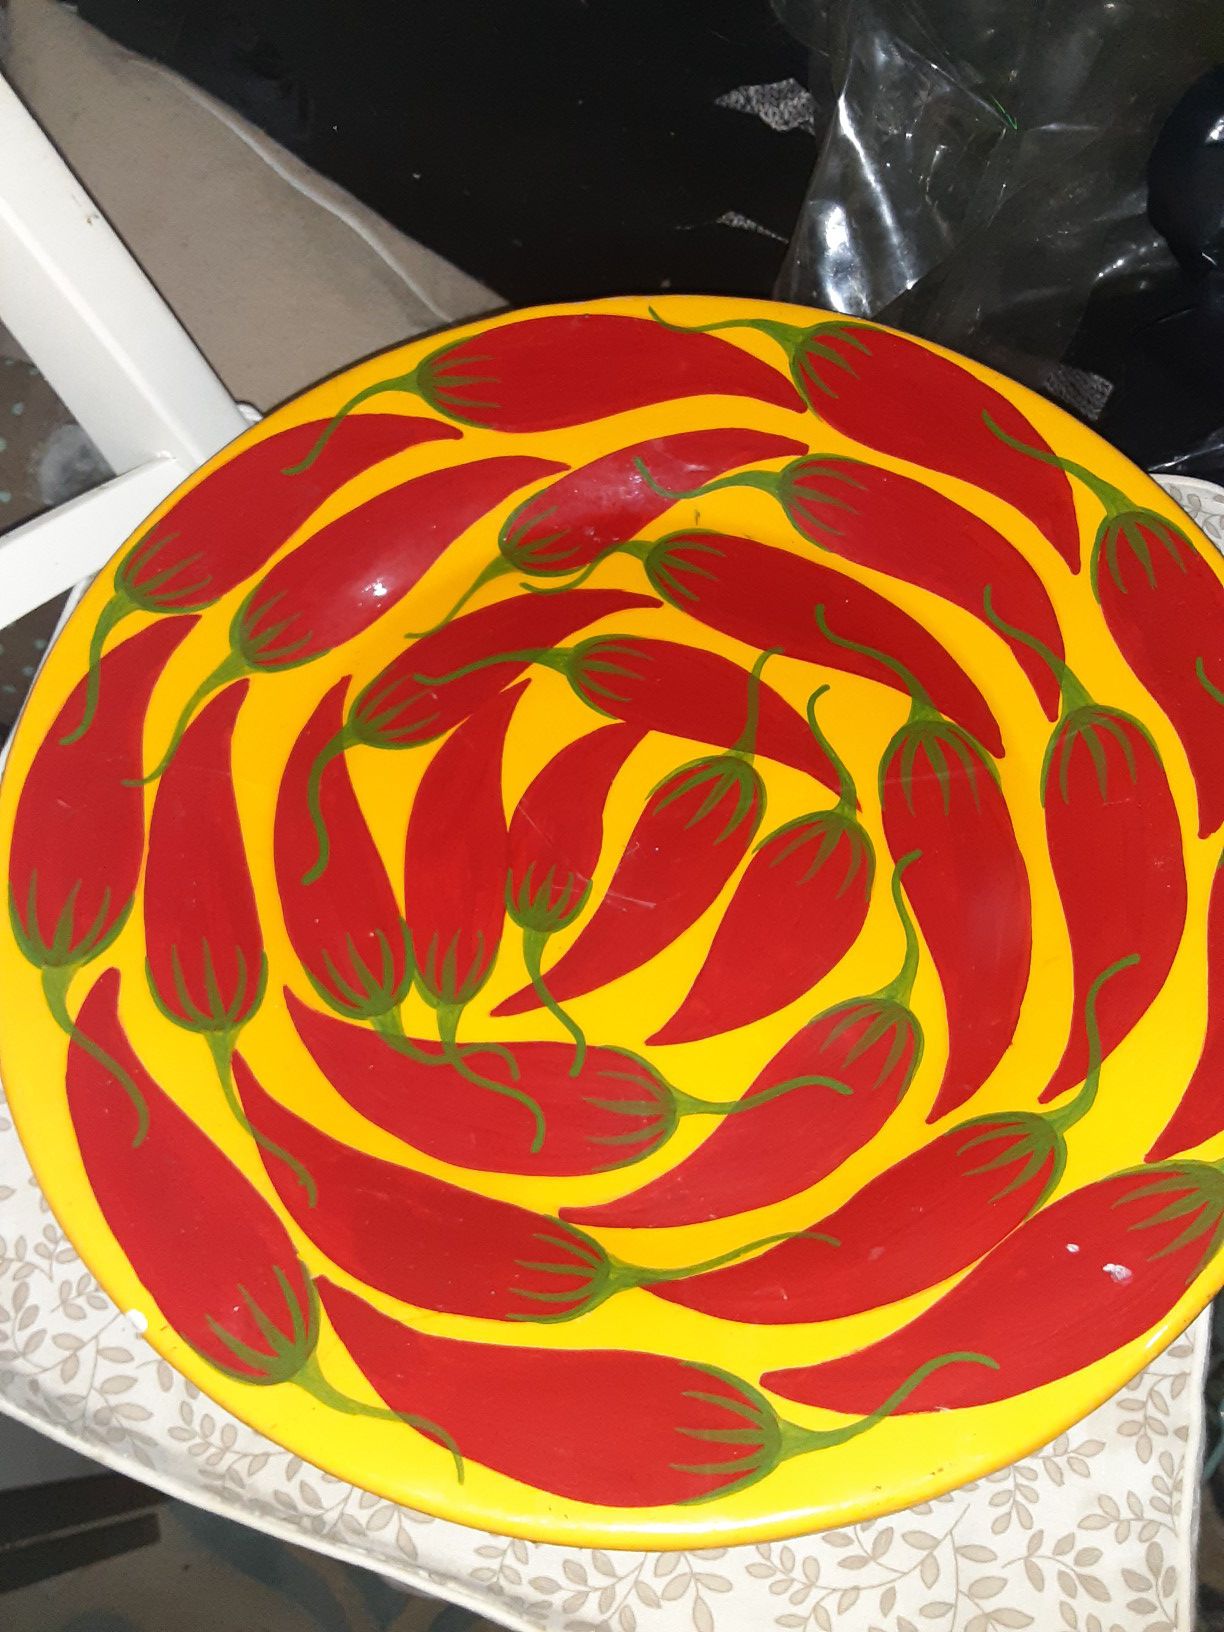 Plate wall decor or Serving dish $15.00 cash only (serious buyers)